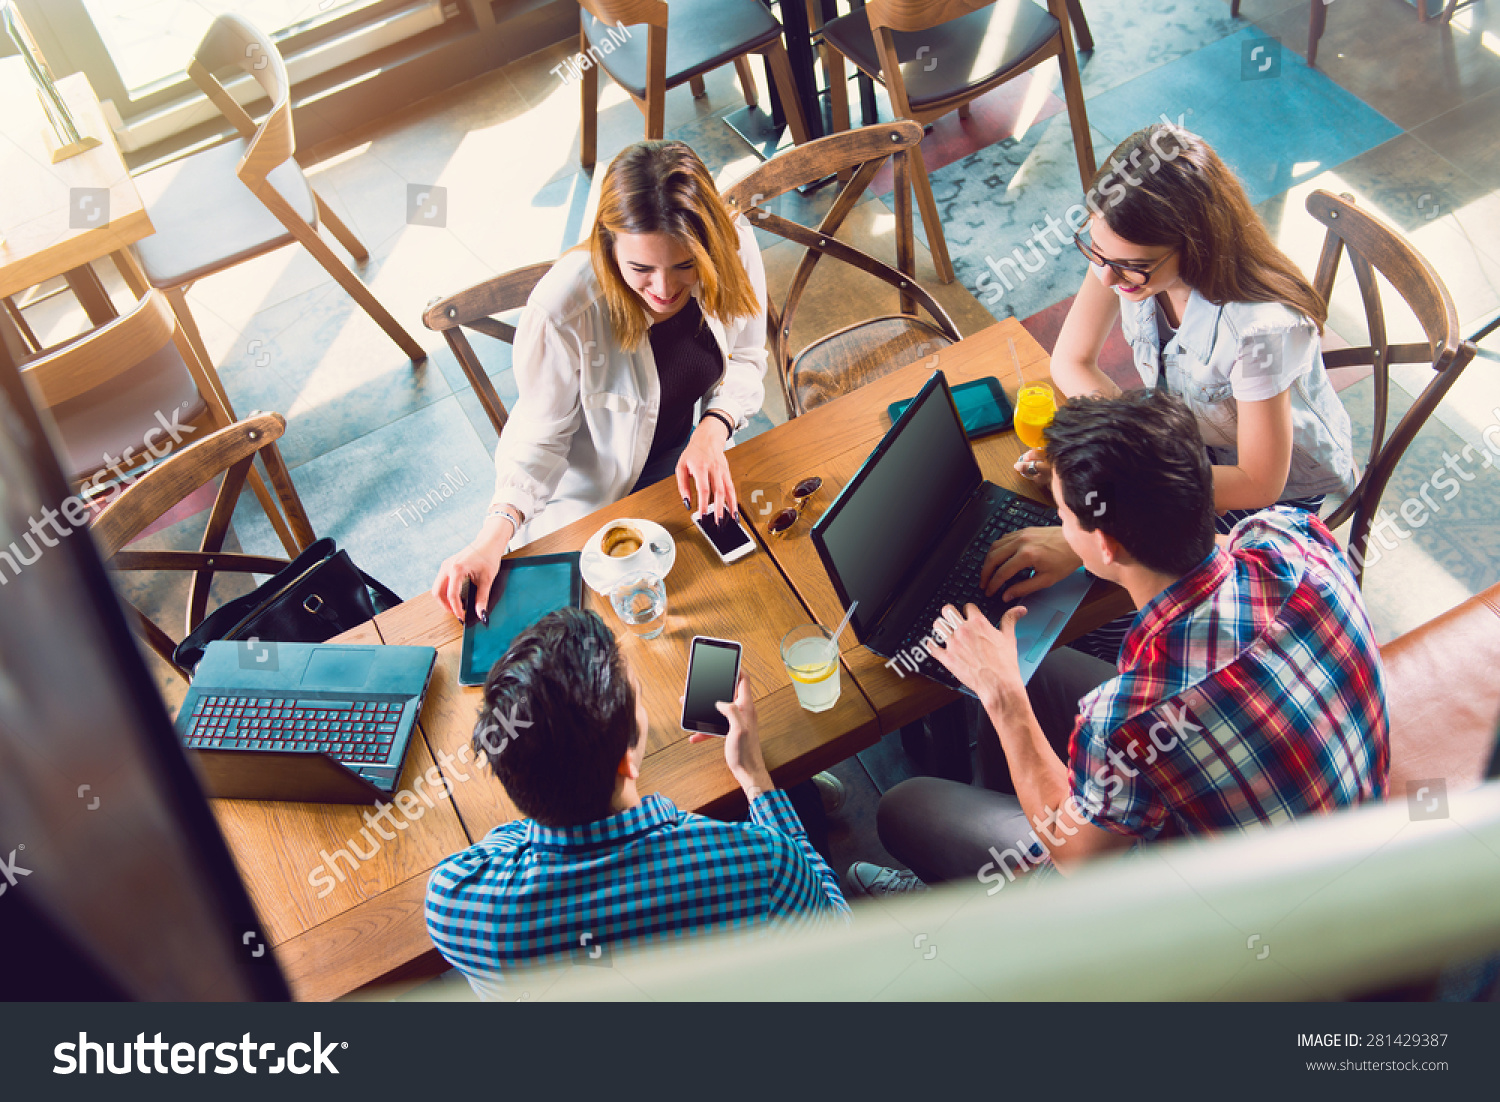 Group of young people sitting at a cafe, talking and enjoying, top view #281429387